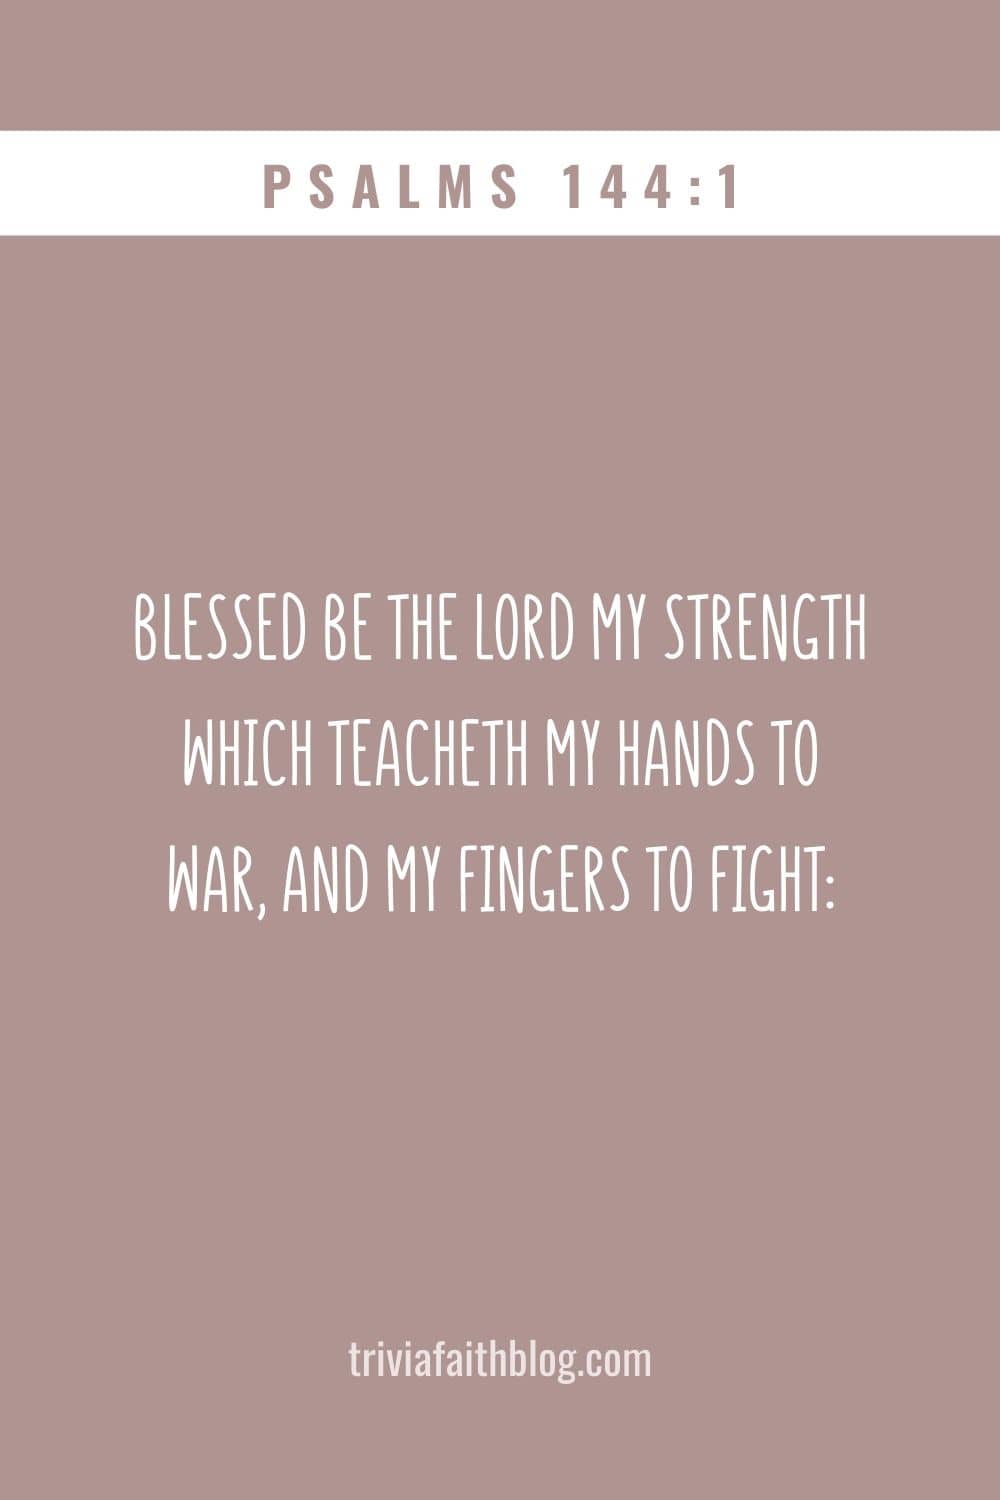 Blessed be the LORD my strength which teacheth my hands to war, and my fingers to fight